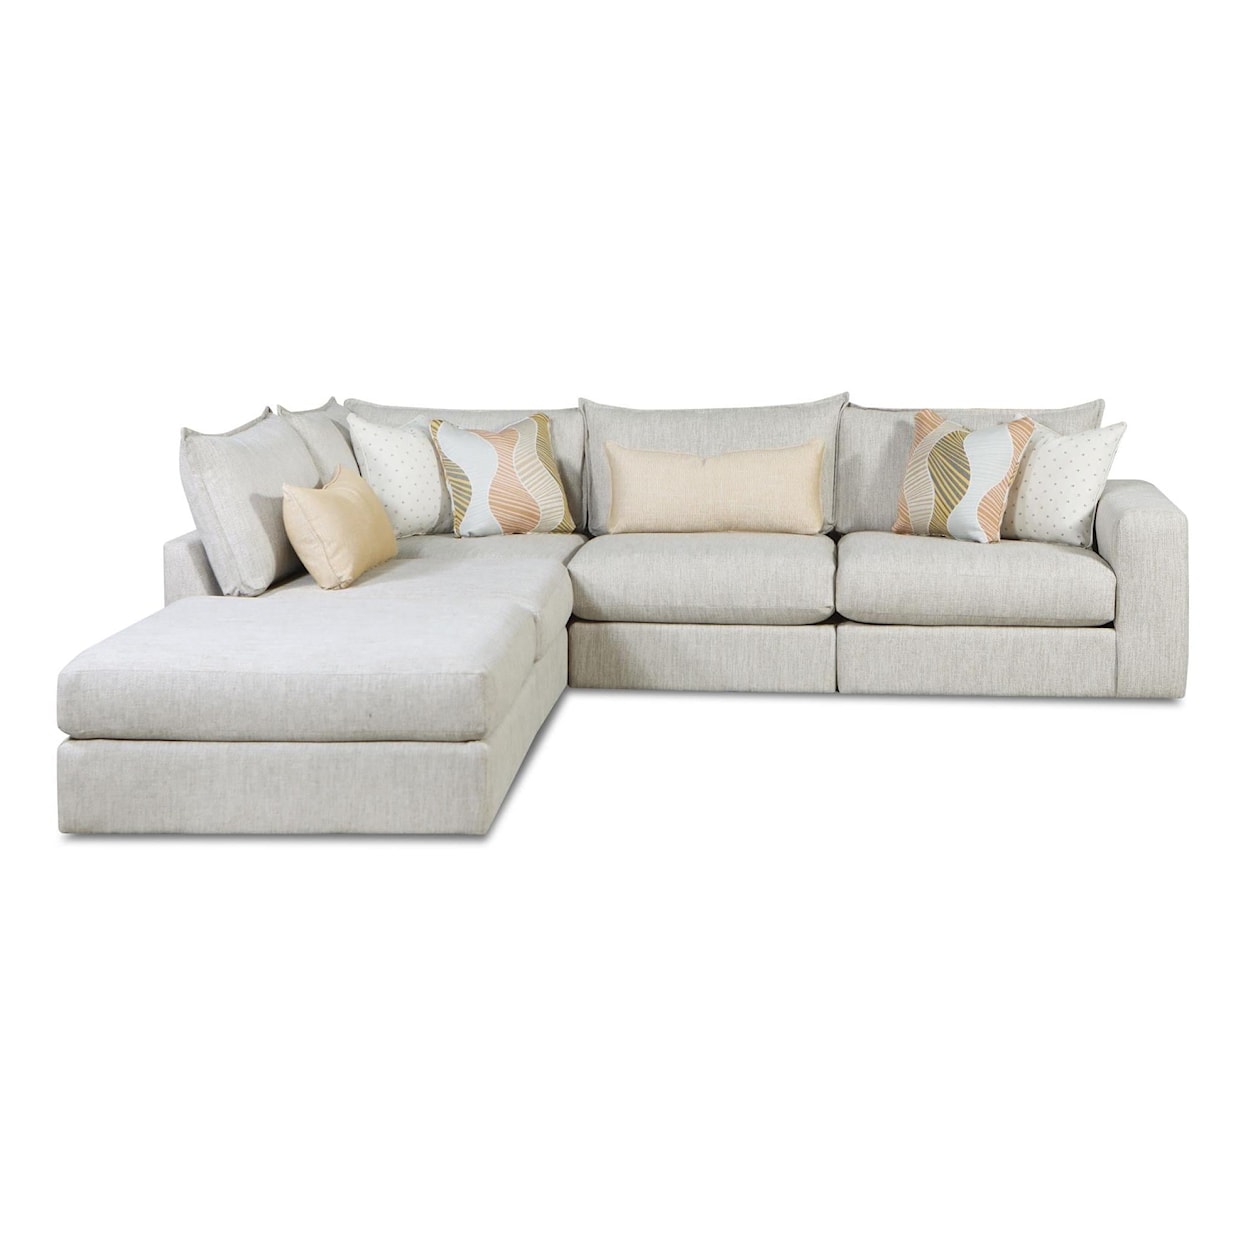 Fusion Furniture 7004 LOXLEY COCONUT Sectional